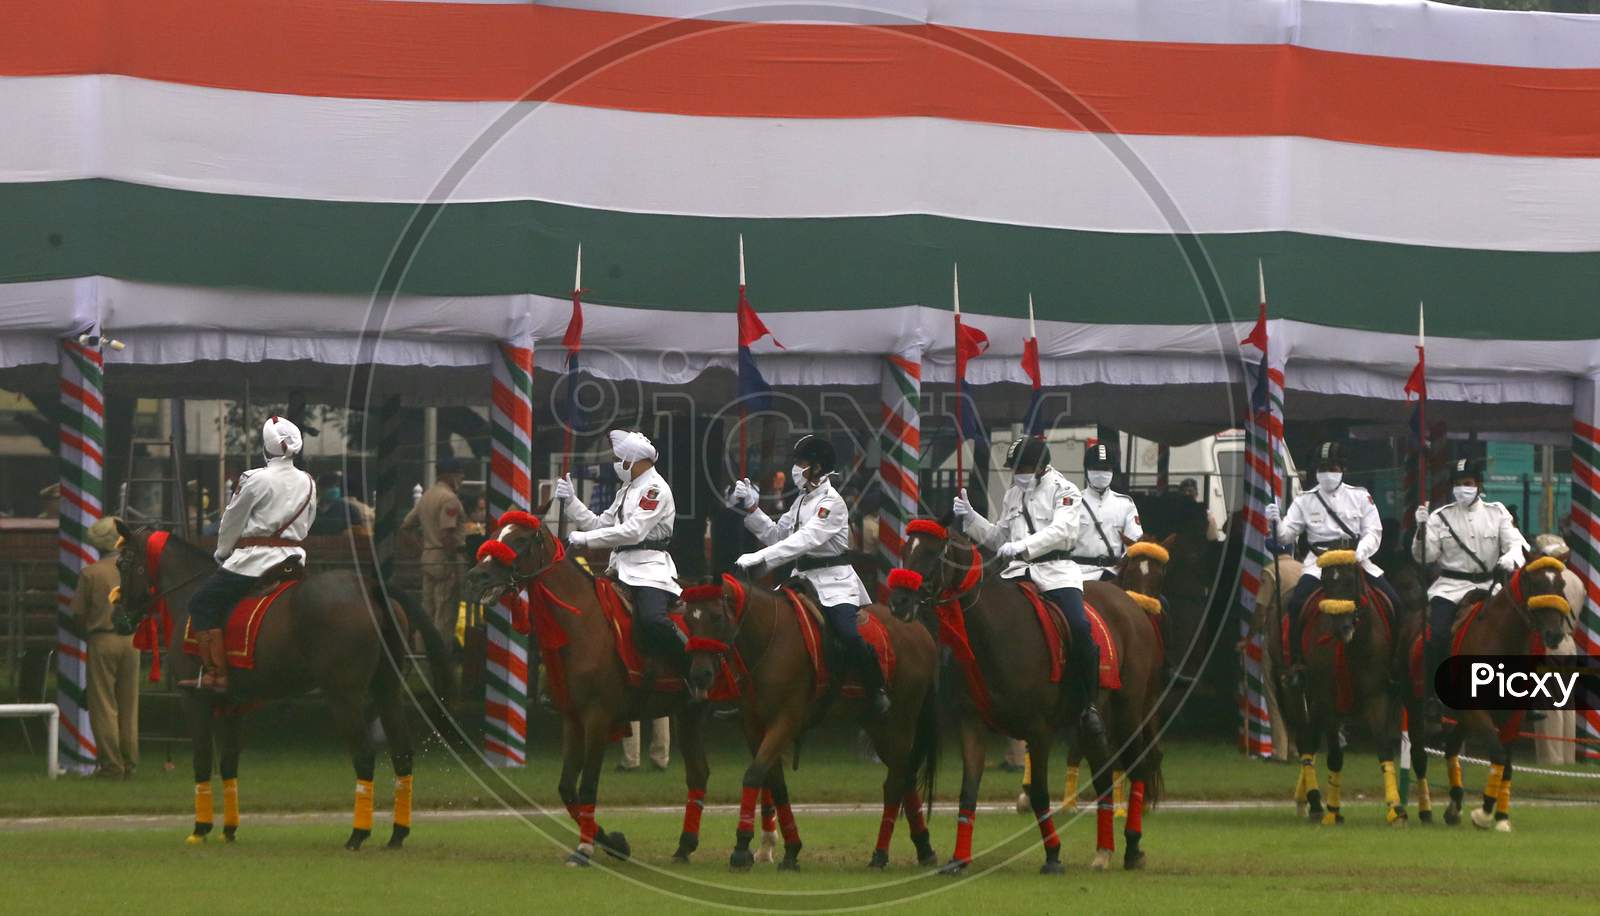 Policemen take part in  full dress rehearsal ahead of India's 74th  Independence day in Chandigarh August 13, 2020